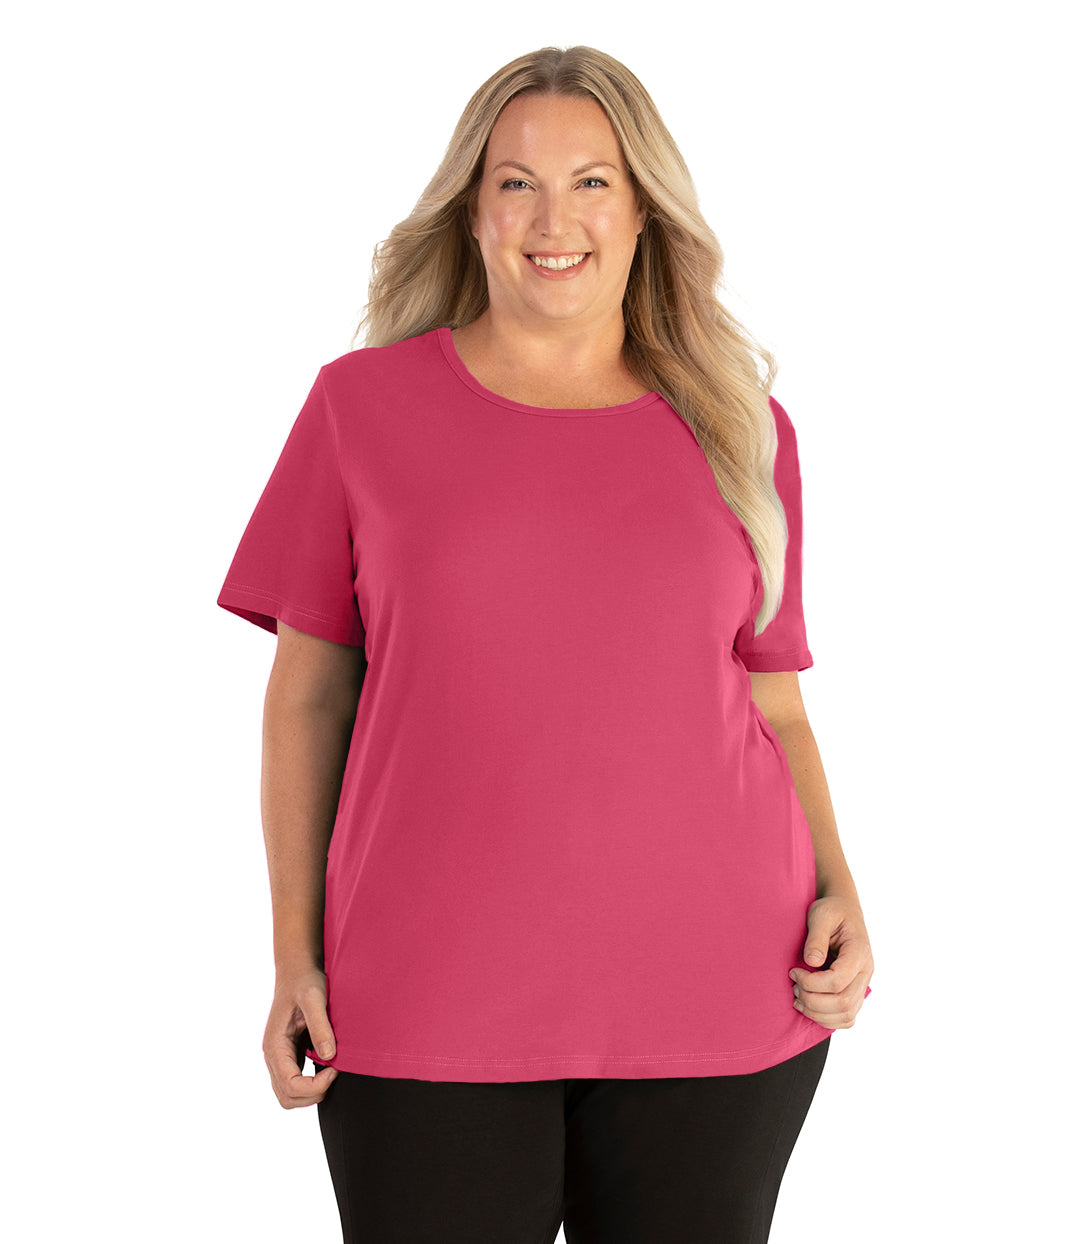 Plus size woman, facing front, wearing JunoActive plus size Stretch Naturals Lite Short Sleeve Scoop Neck Top in the color carnation pink. She is wearing JunoActive Plus Size Leggings in the color black.